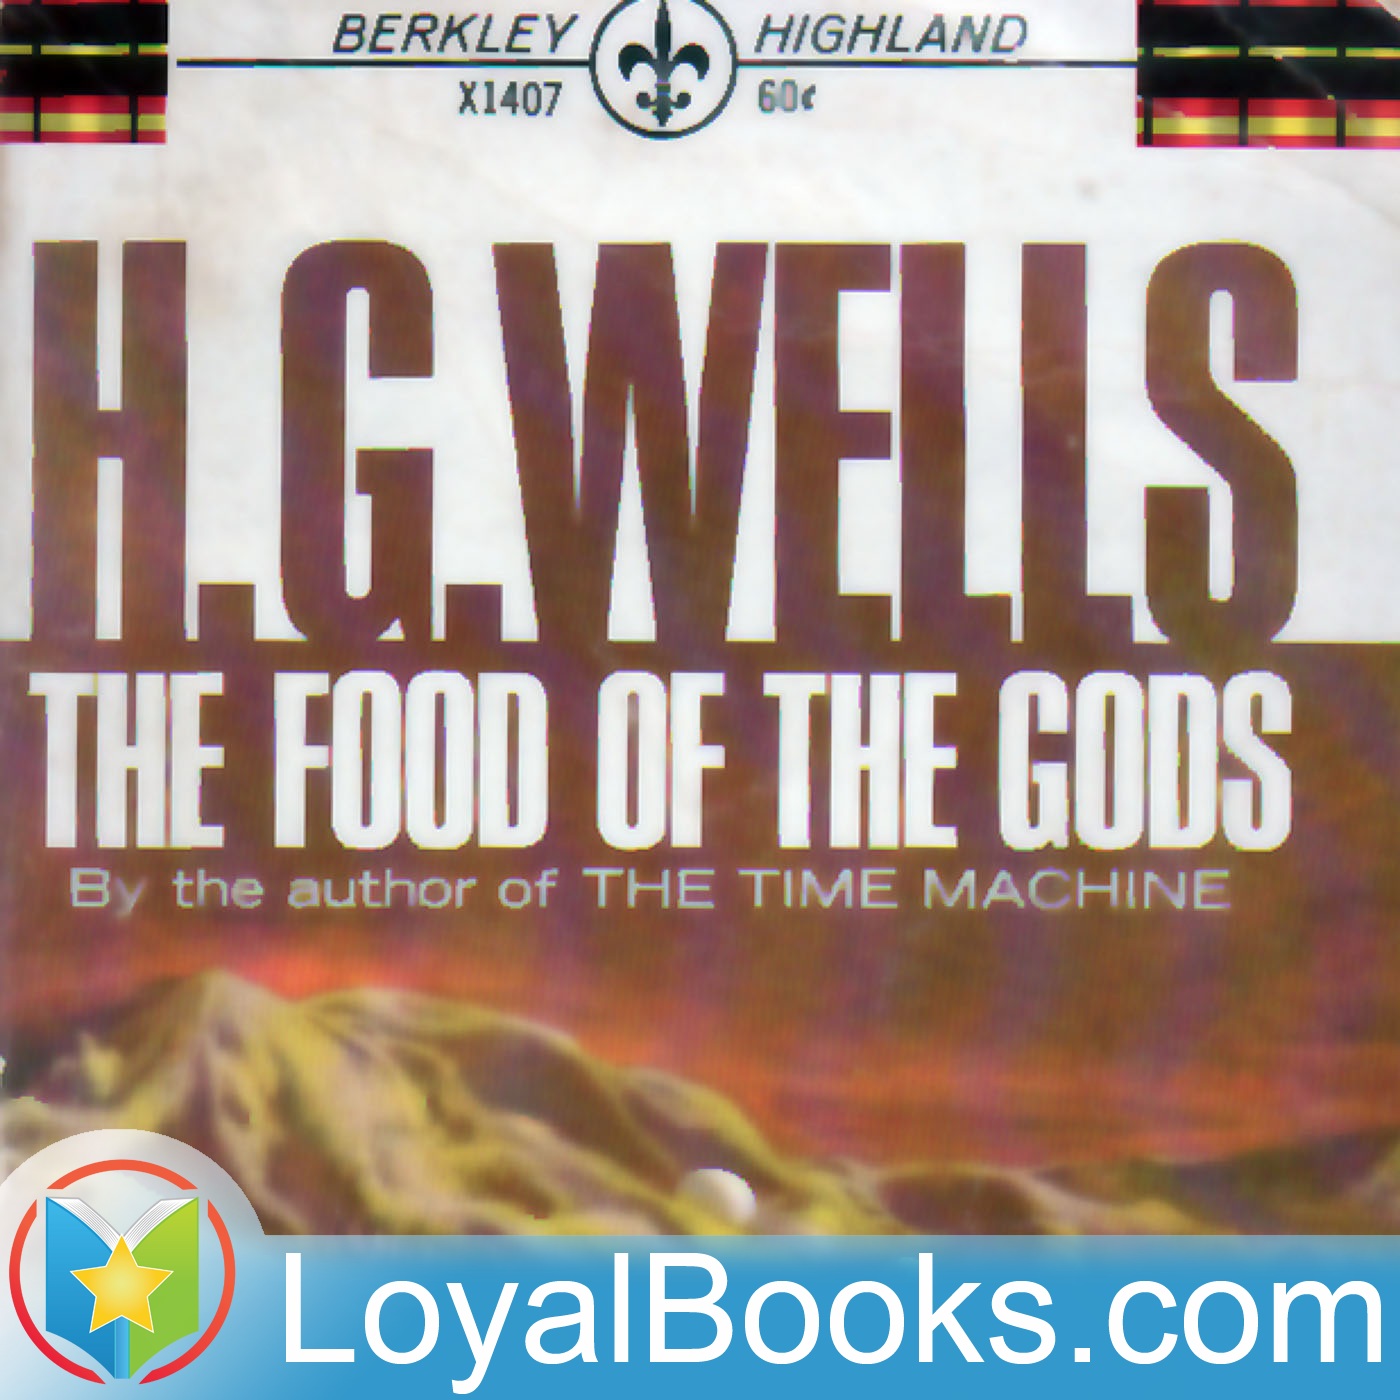 The Food of the Gods and How it Came to Earth by H. G. Wells